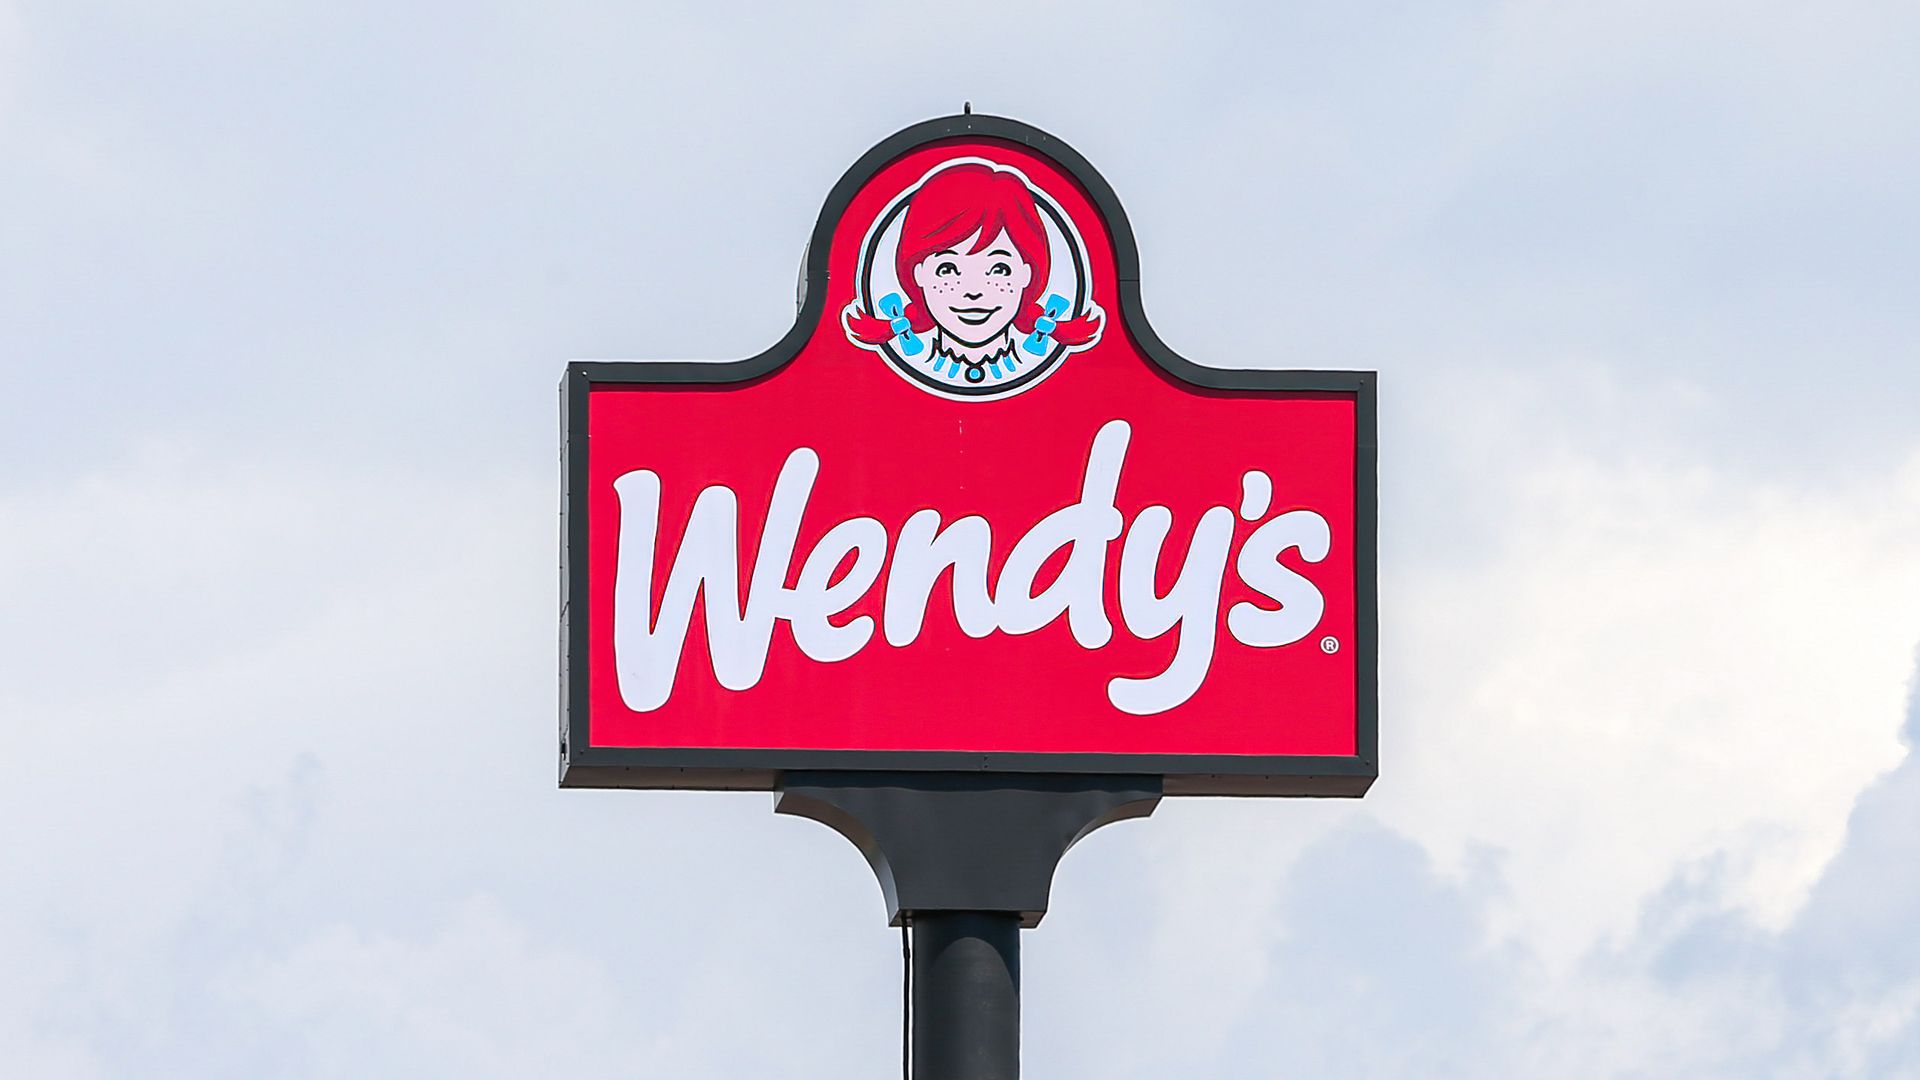 Wendy's is responding to reports that it would hike prices during busy times, clarifying that is not the case.